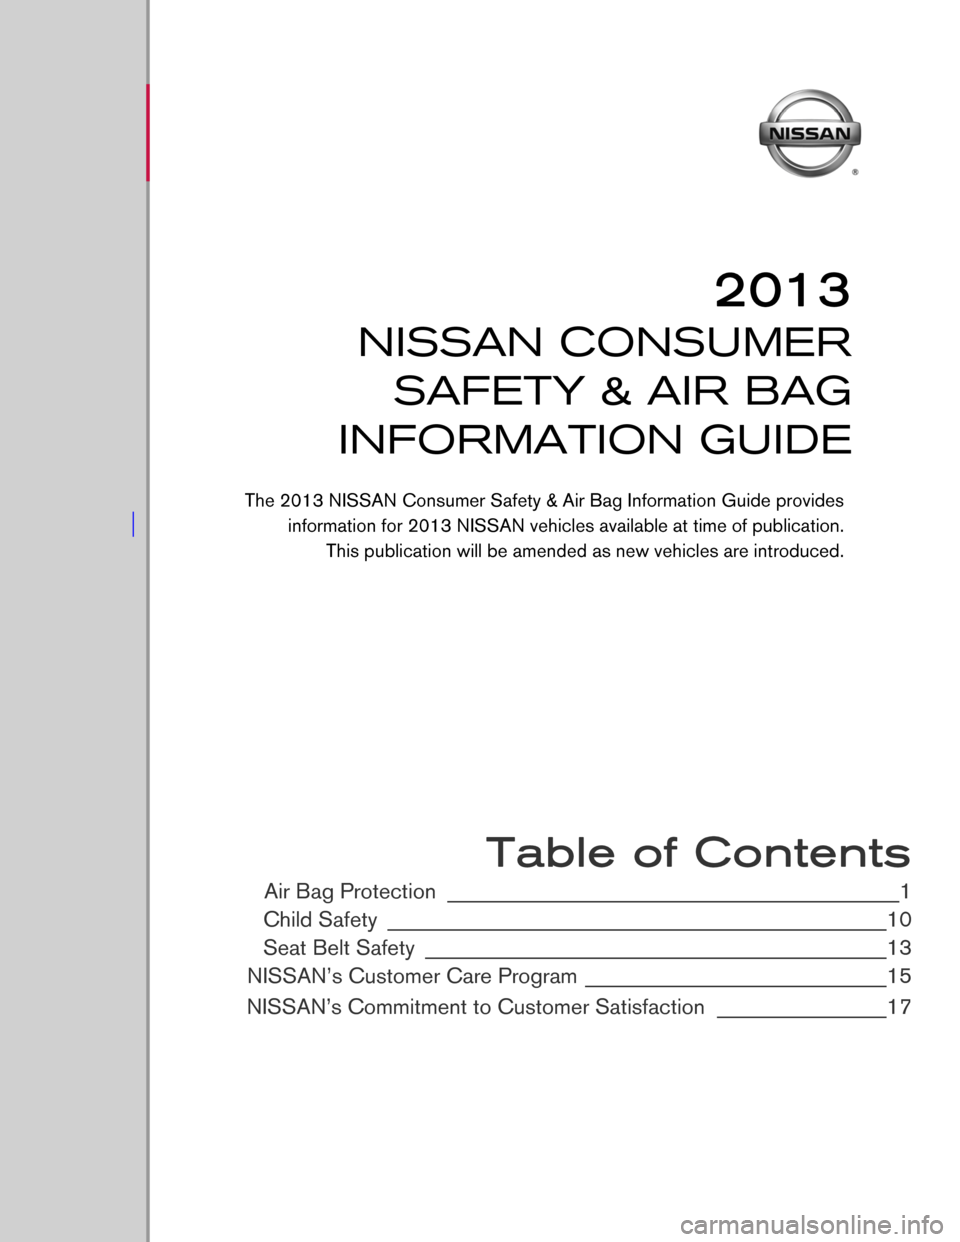 NISSAN ROGUE 2013 2.G Consumer Safety Air Bag Information Guide  
 
 
 
 
 
 
 
 
 
 
 
 
 
 
 
 
 
 
 
 
 
 
 Table of Contents
Air Bag Protection ________________________________________________1
Child Safety
 ____________________________________________________